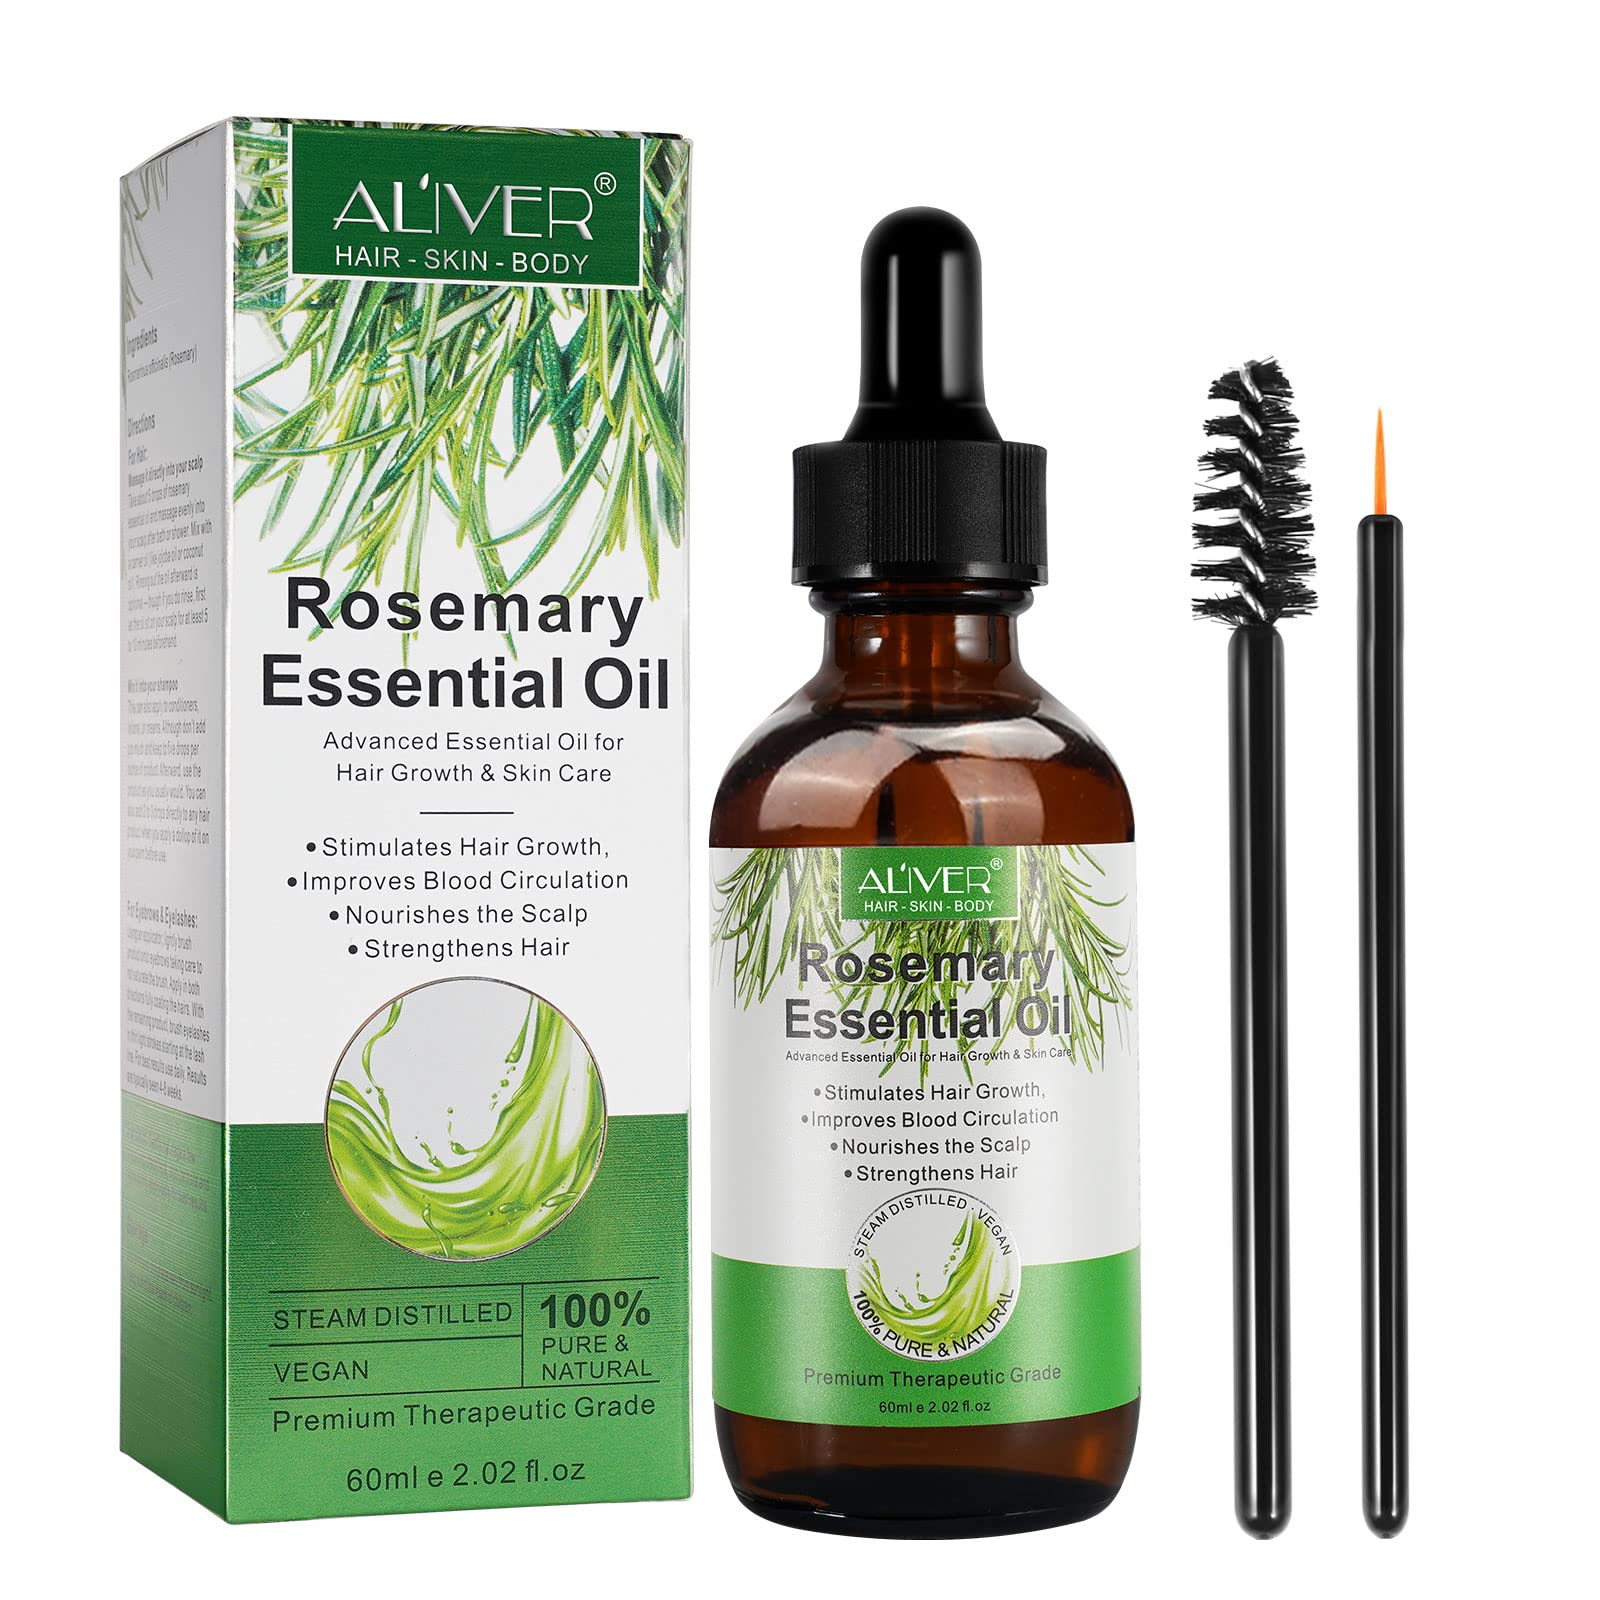 Mua Rosemary Oil for Hair Growth ,Rosemary Essential Oil for Hair Loss  Regrowth Treatment,Strengthens Hair,Nourishes Scalp,Light Weight,Non  Greasy,Improves Scalp Circulation For Men And Women  Oz trên Amazon Mỹ  chính hãng 2023 |